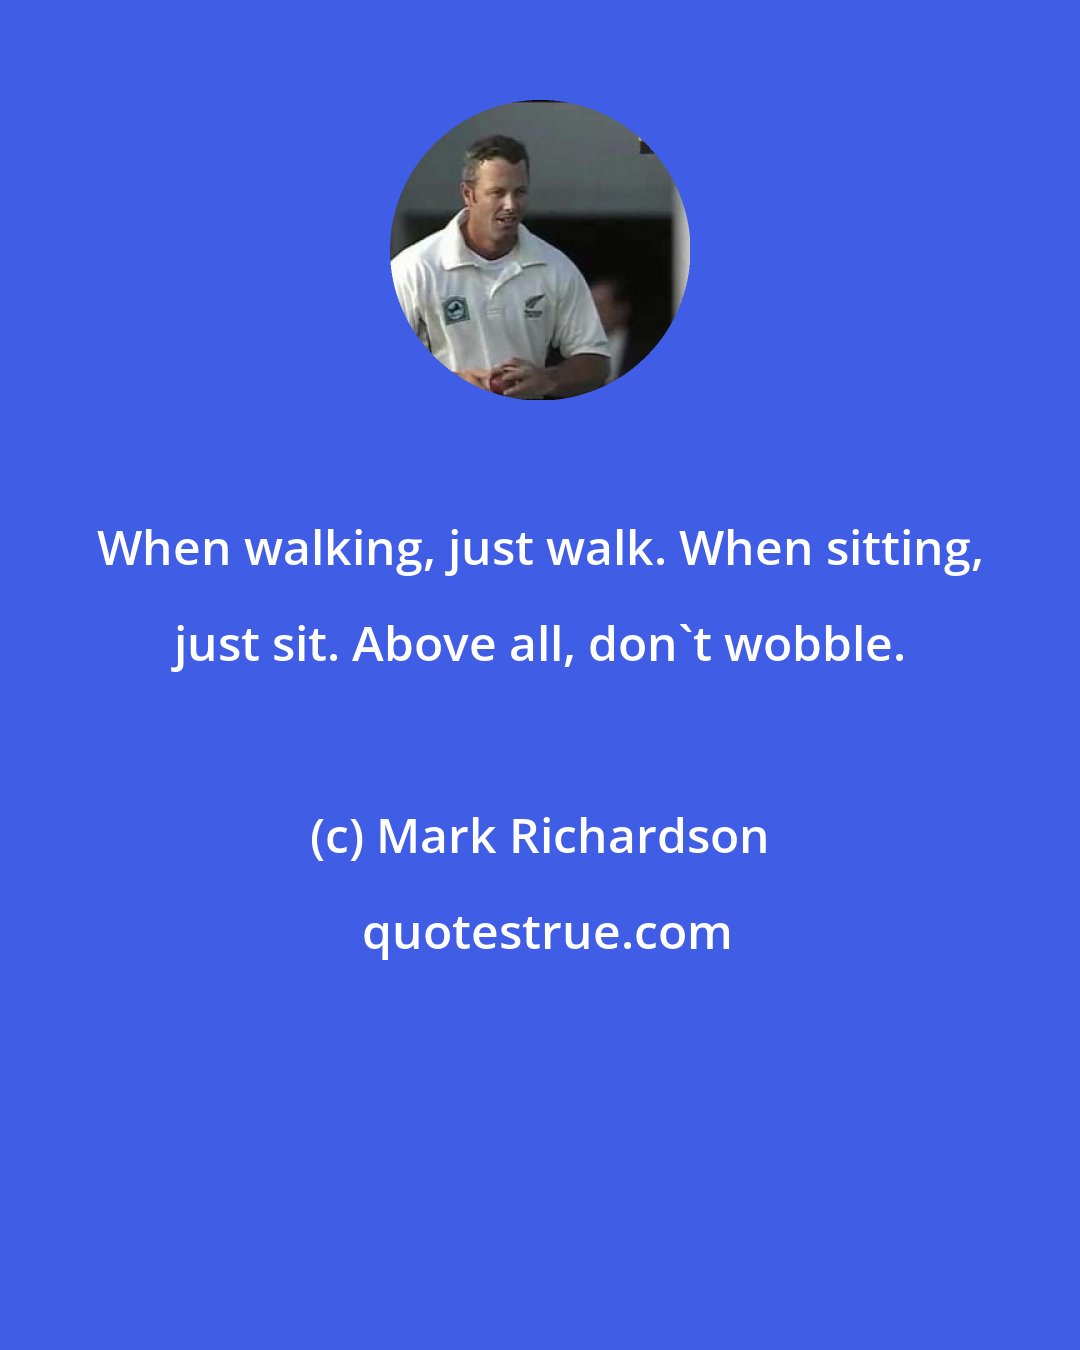 Mark Richardson: When walking, just walk. When sitting, just sit. Above all, don't wobble.